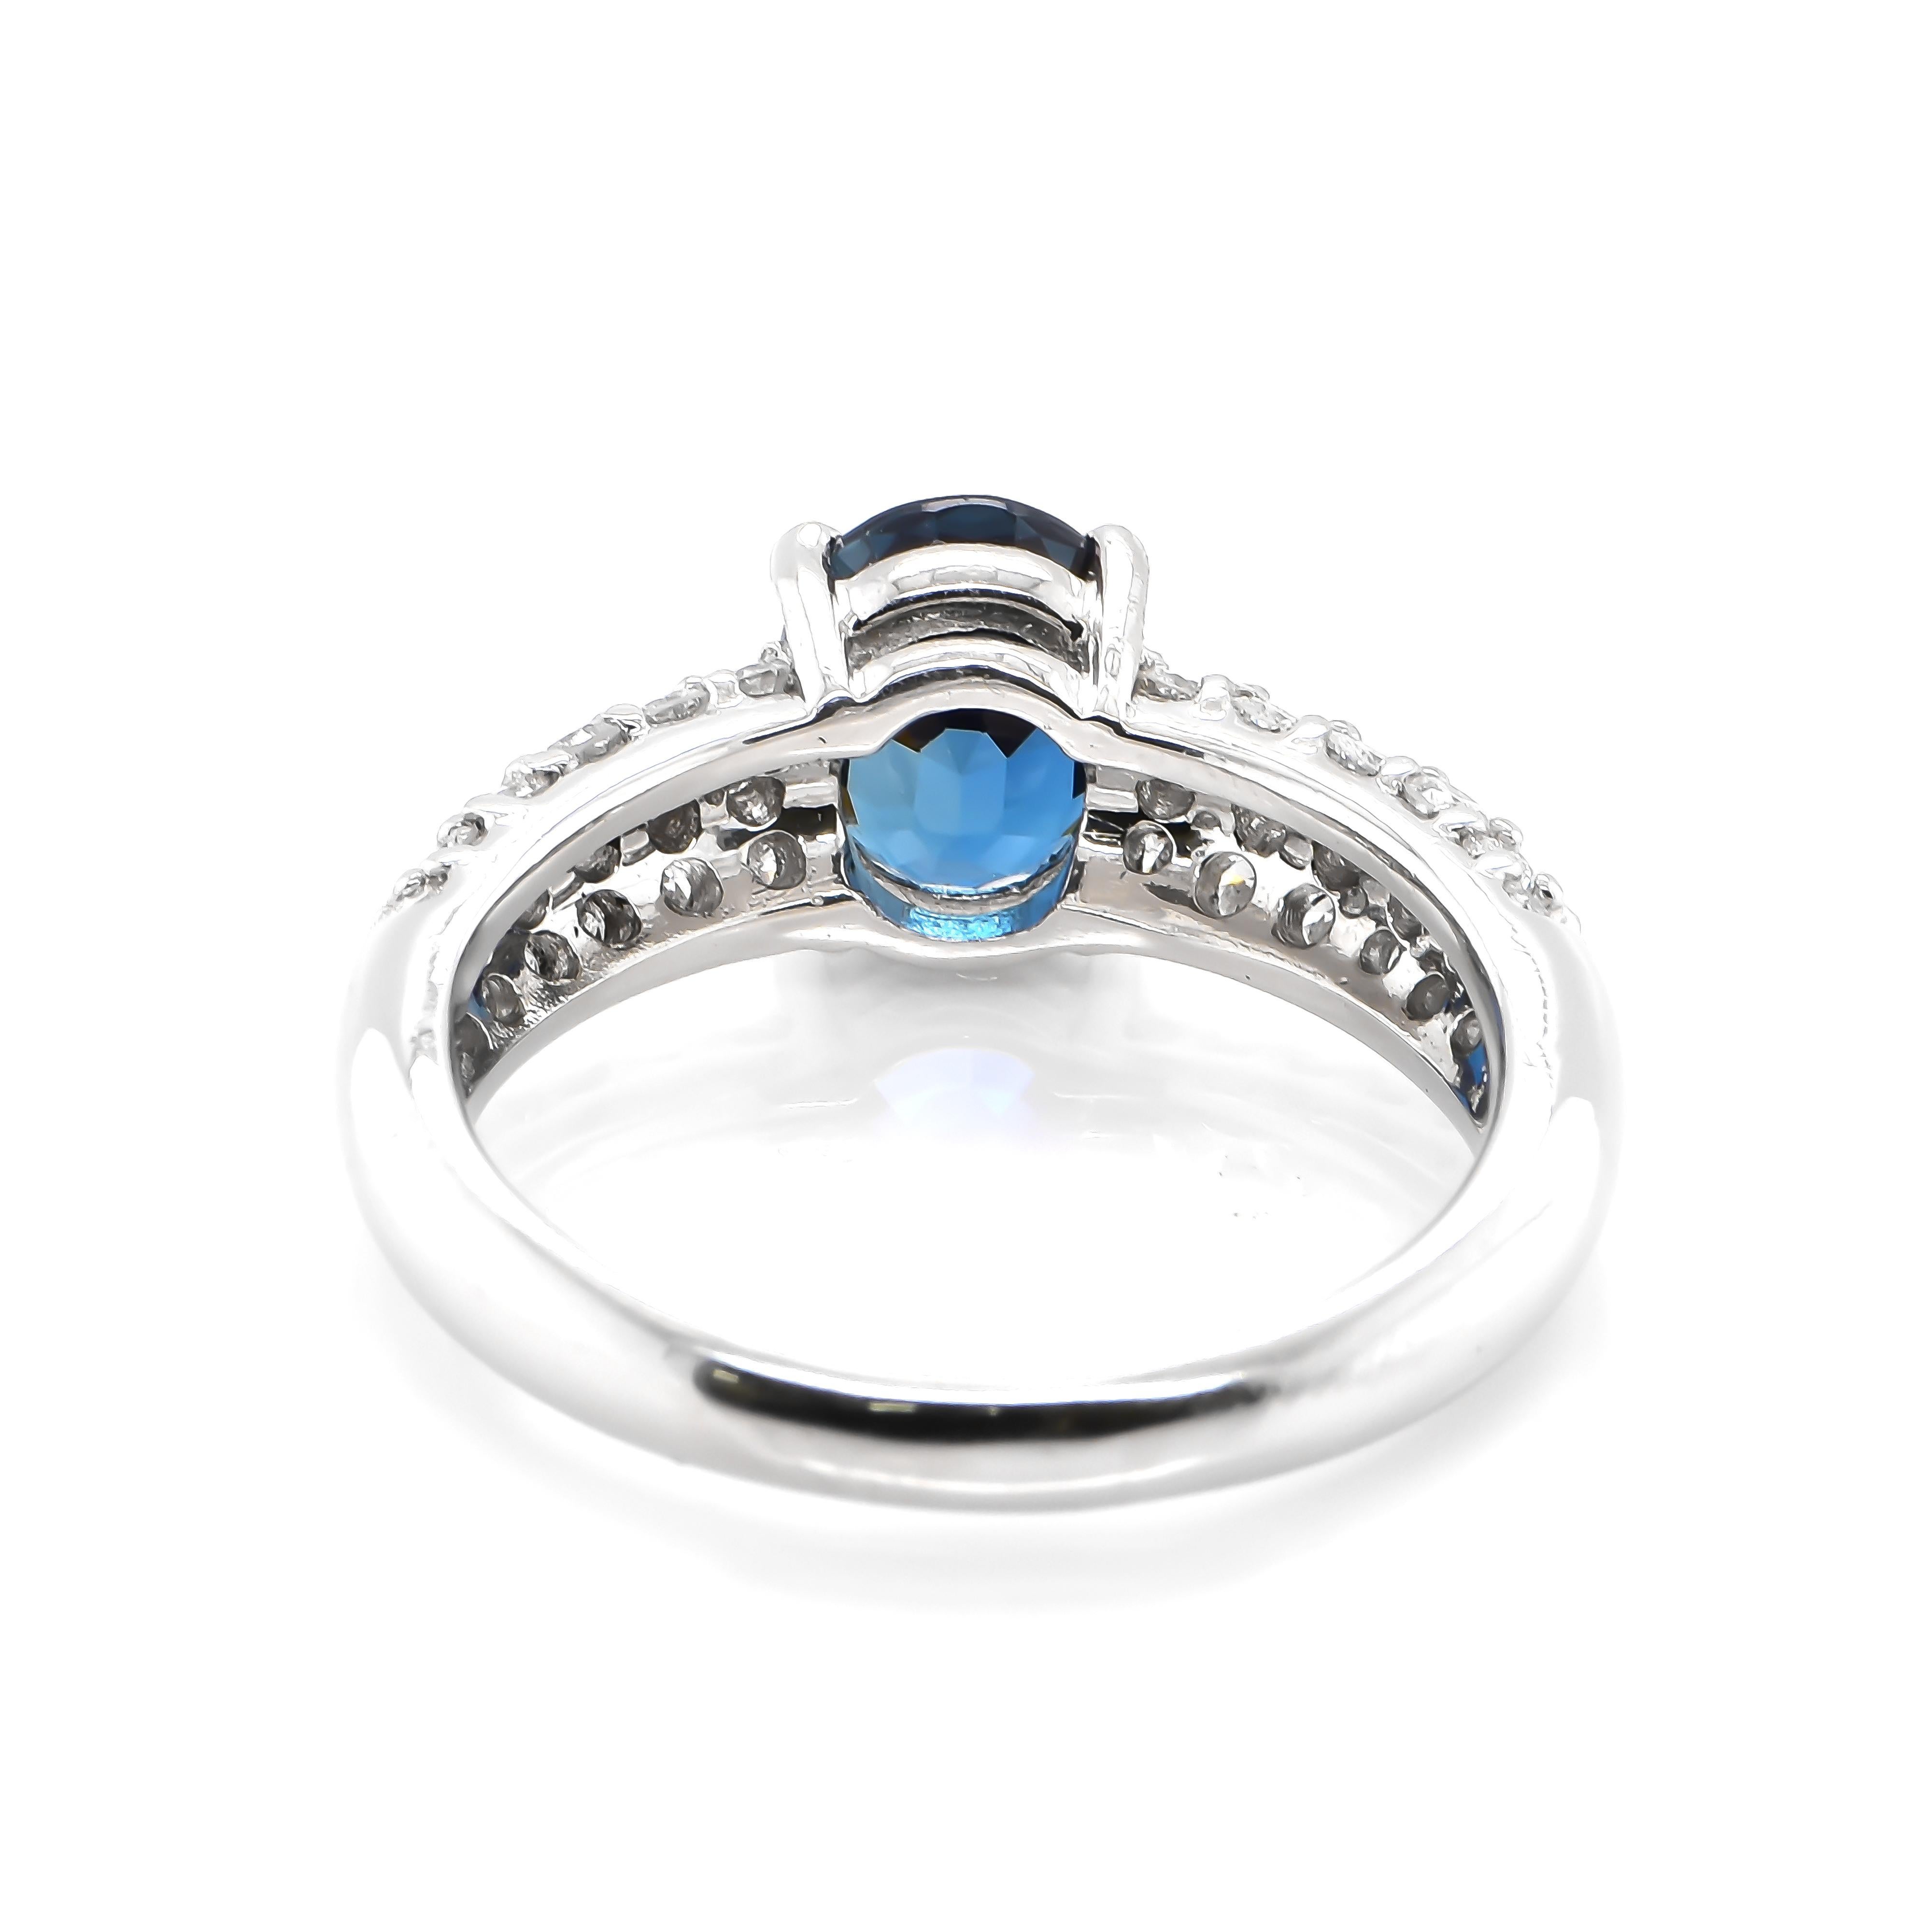 Women's 2.25 Carat Natural Blue Sapphire and Diamond Cocktail Ring Made in Platinum For Sale